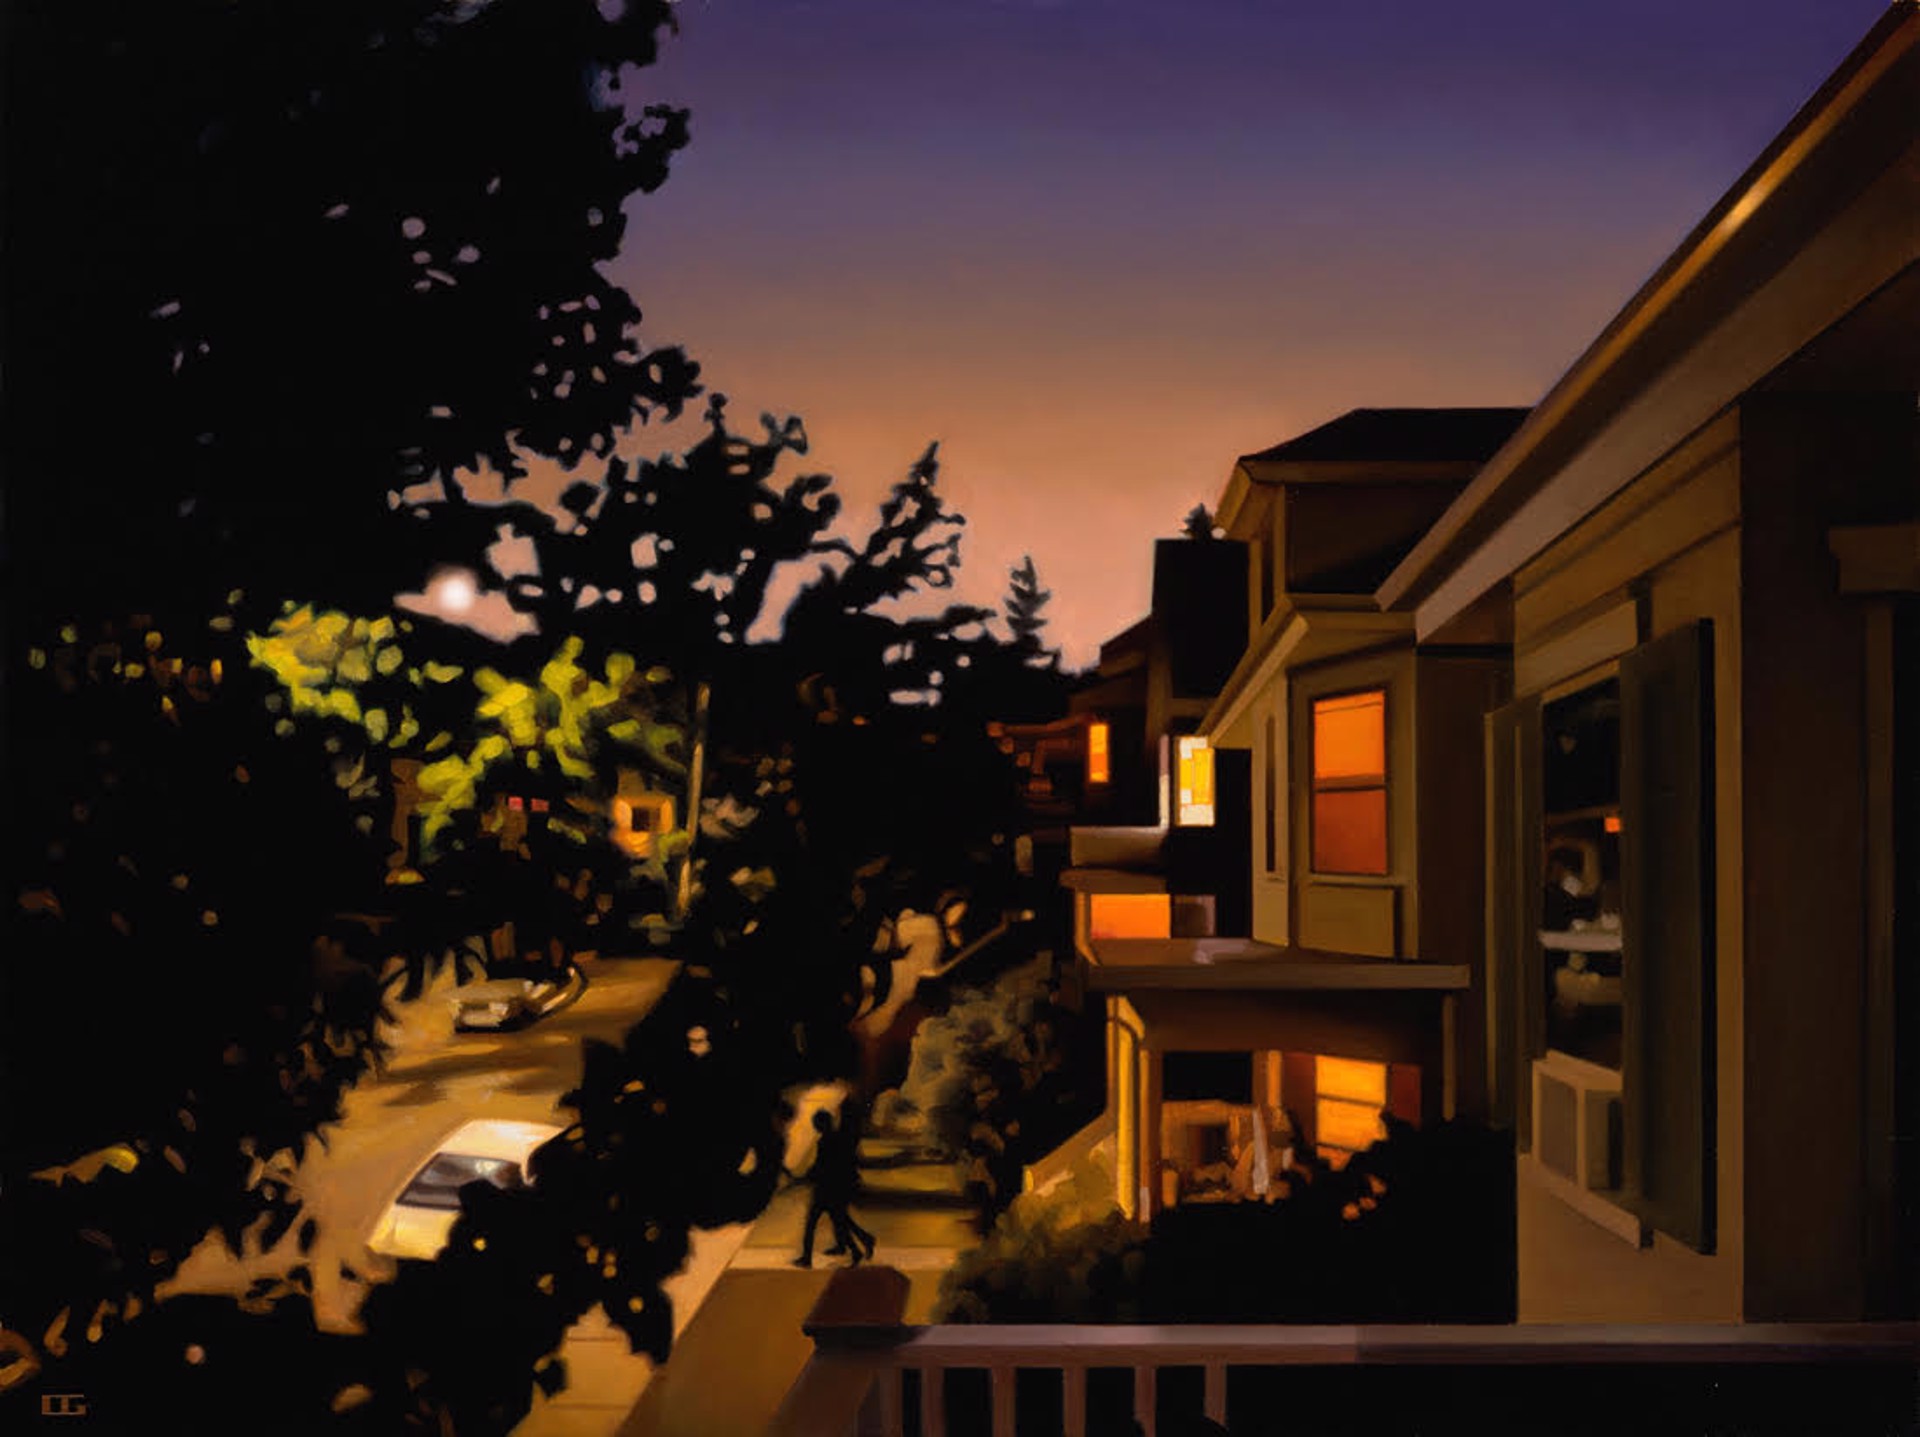 Night Walk by Carrie Graber